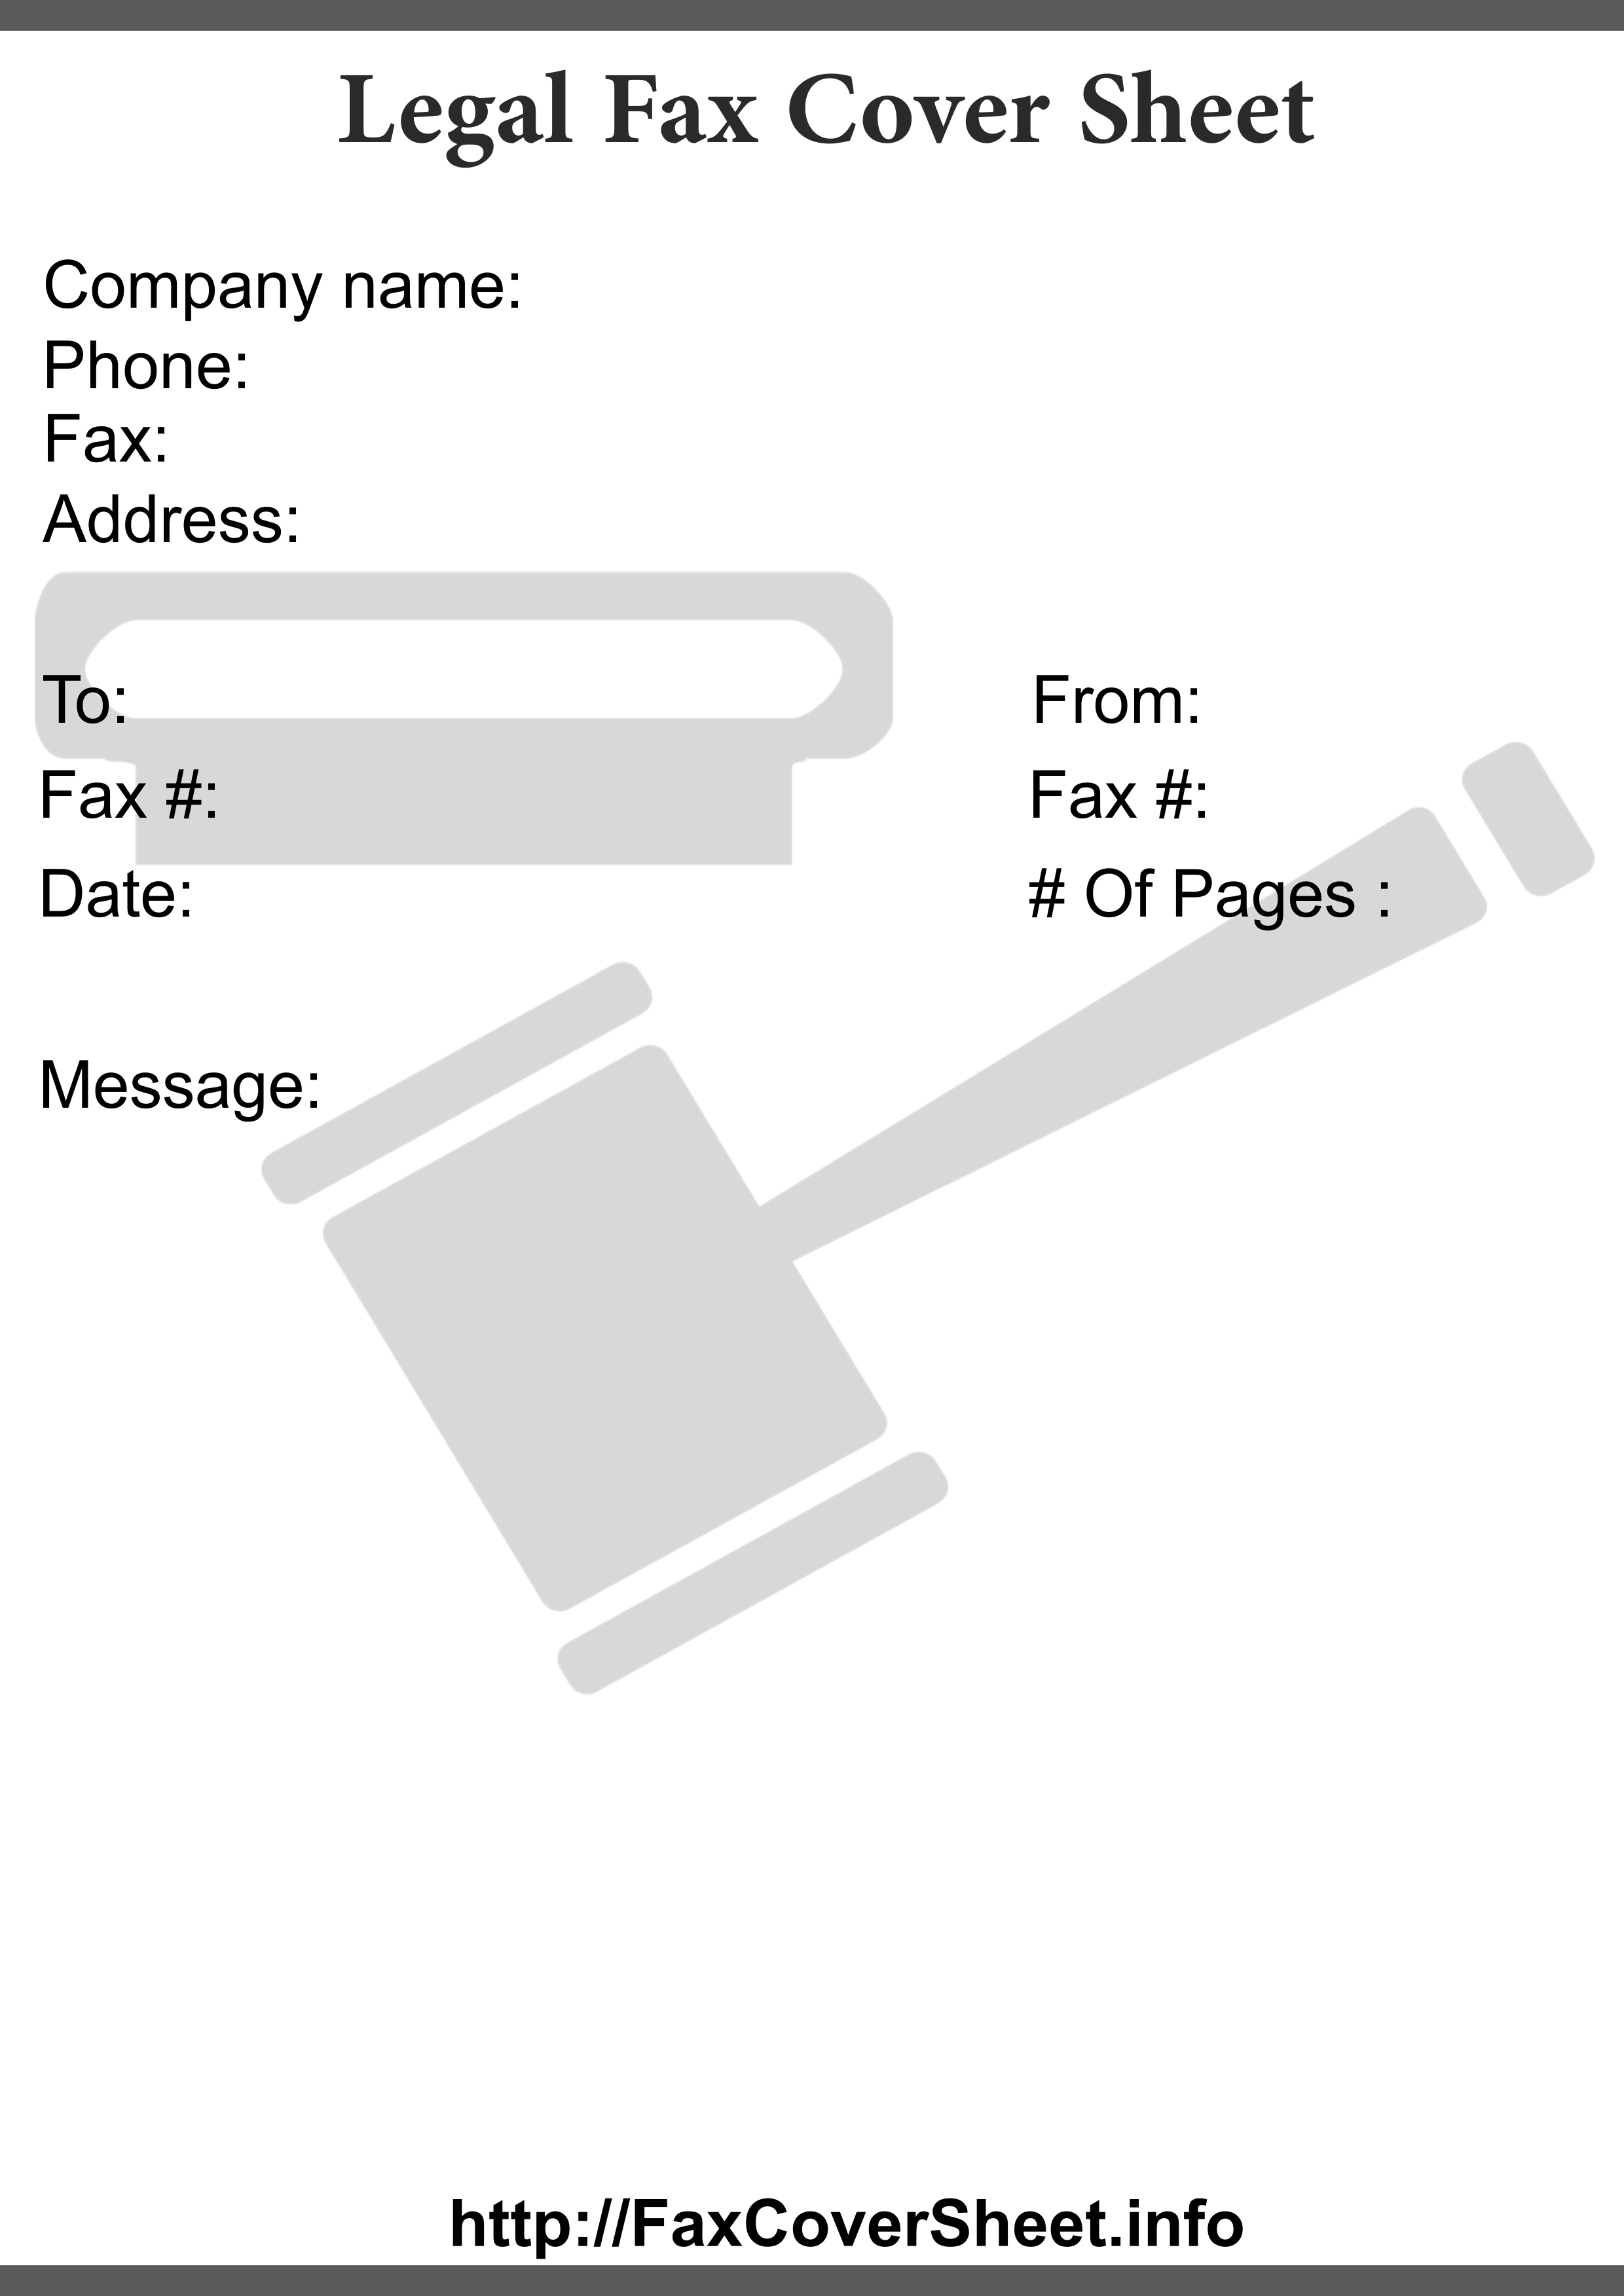 Free Legal Fax Cover Sheet